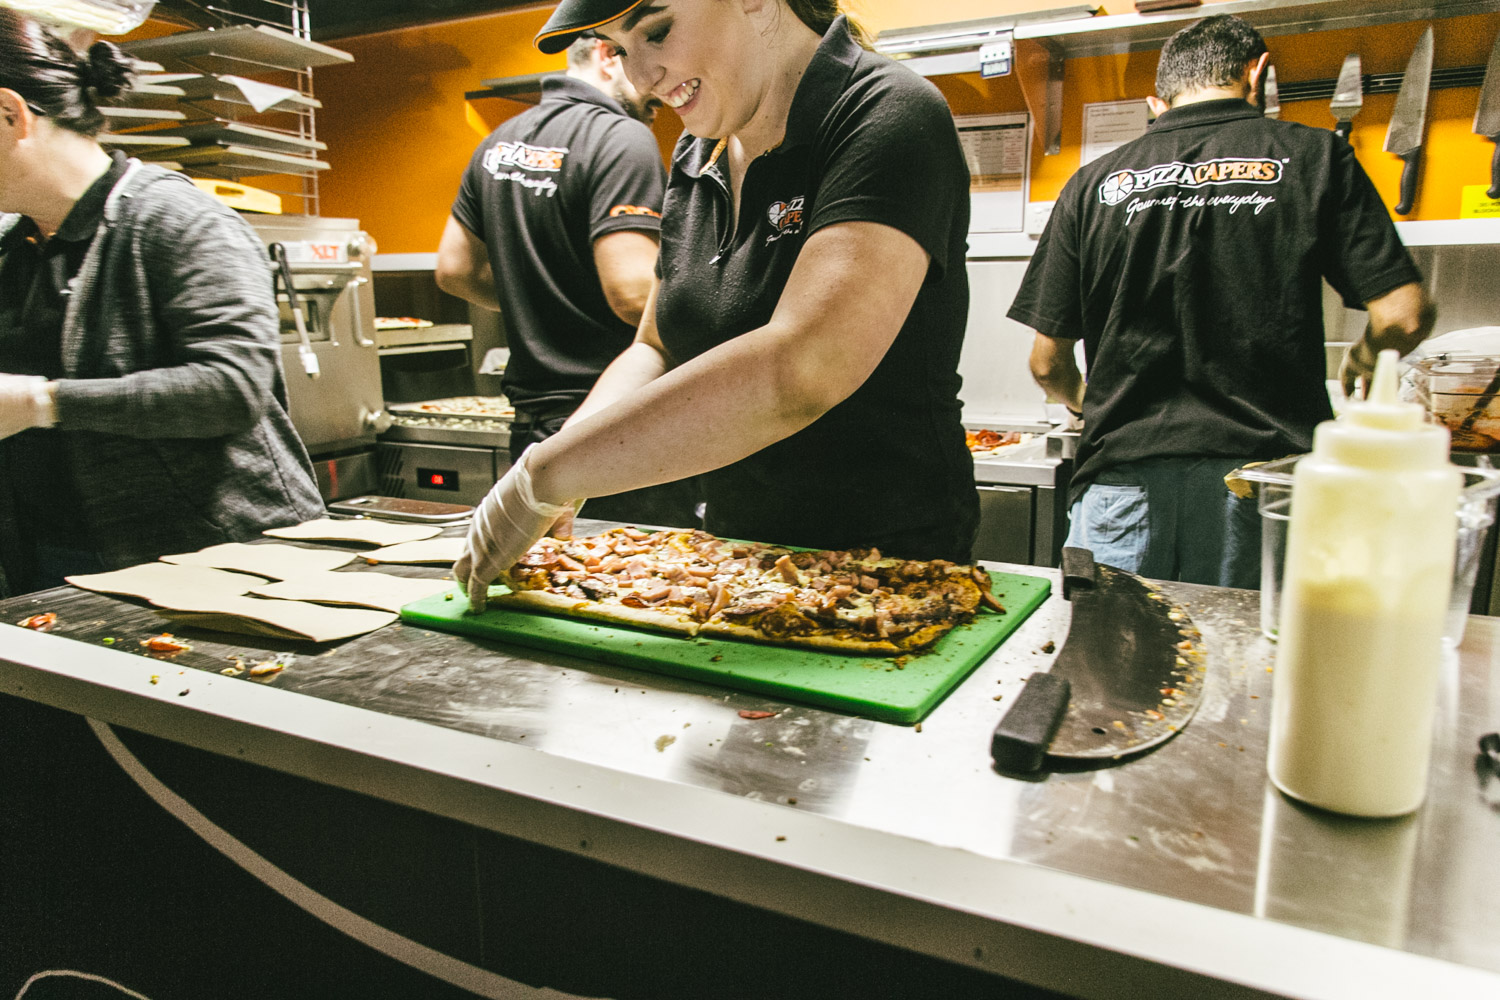 SPA_270717_PIZZACAPERS_-56.jpg